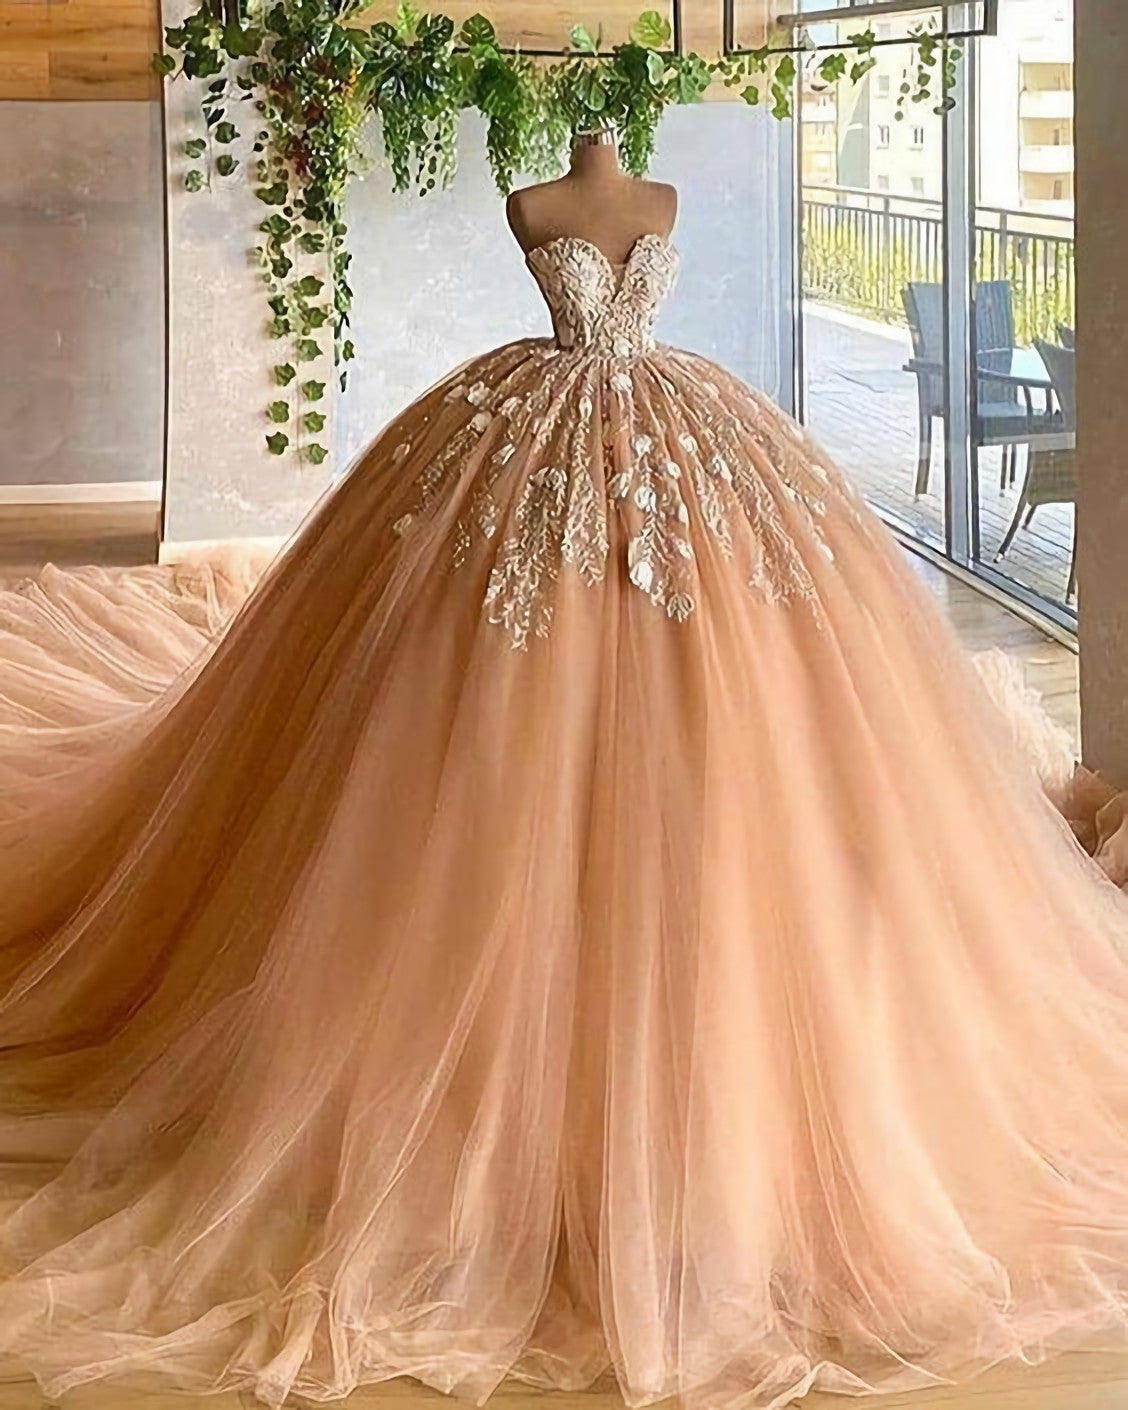 Party Dresses 2030, Applique Tulle Pleated Sweetheart Champagne Ball Gown Evening Dress